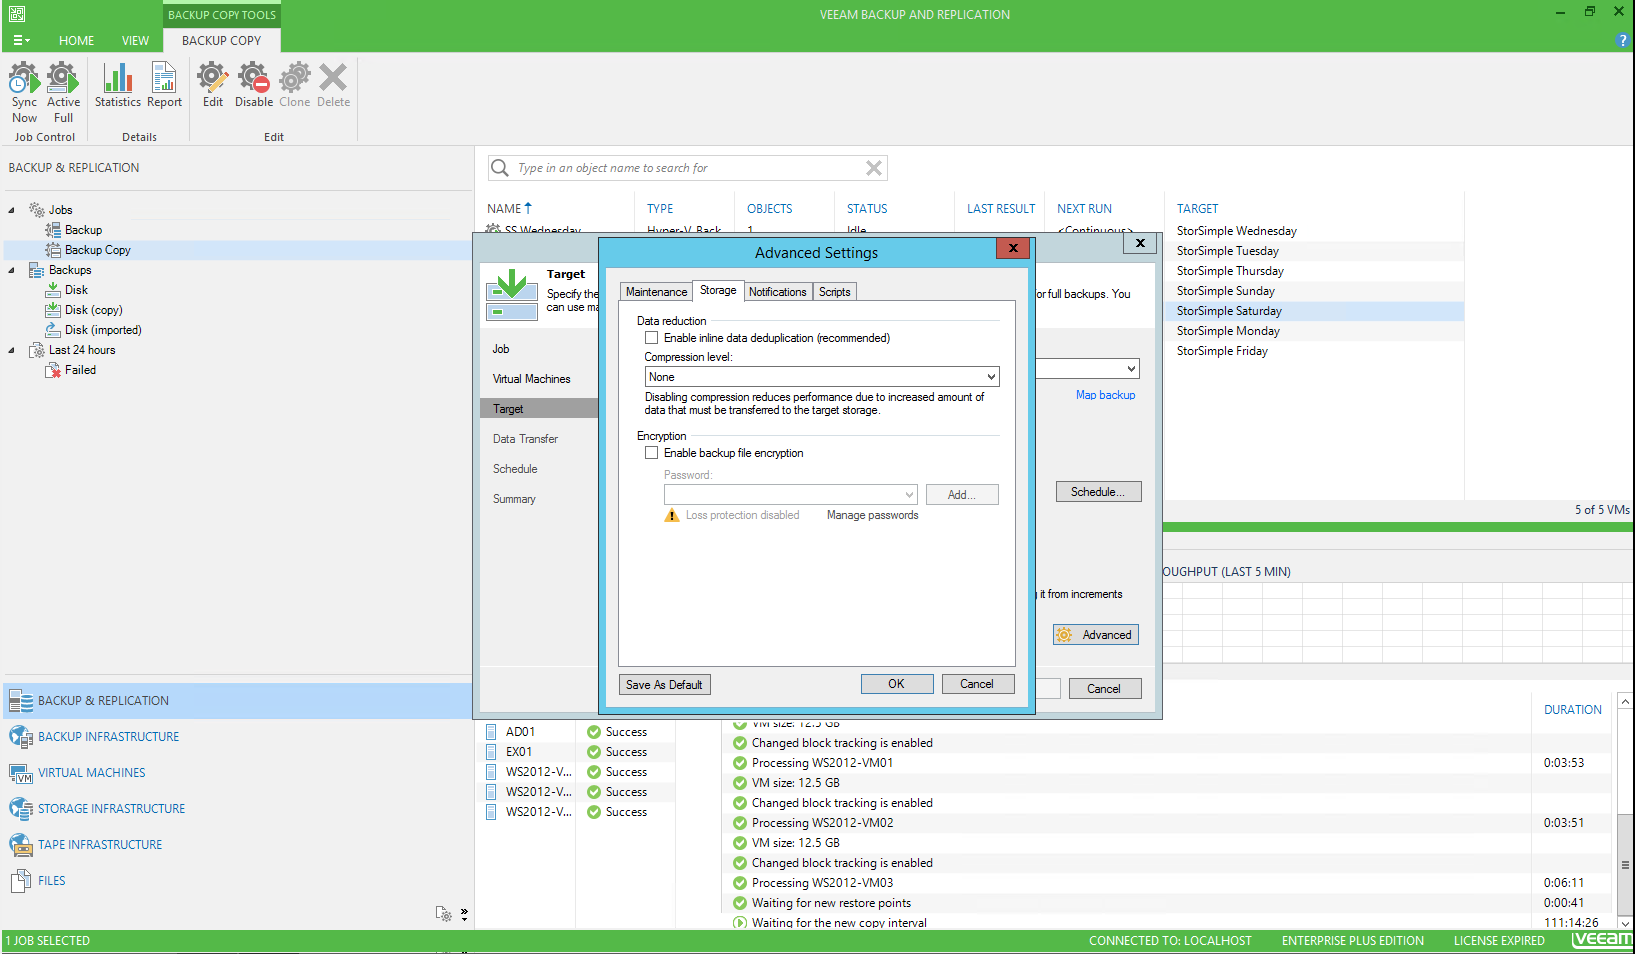 Veeam management console, new backup copy job advanced settings page